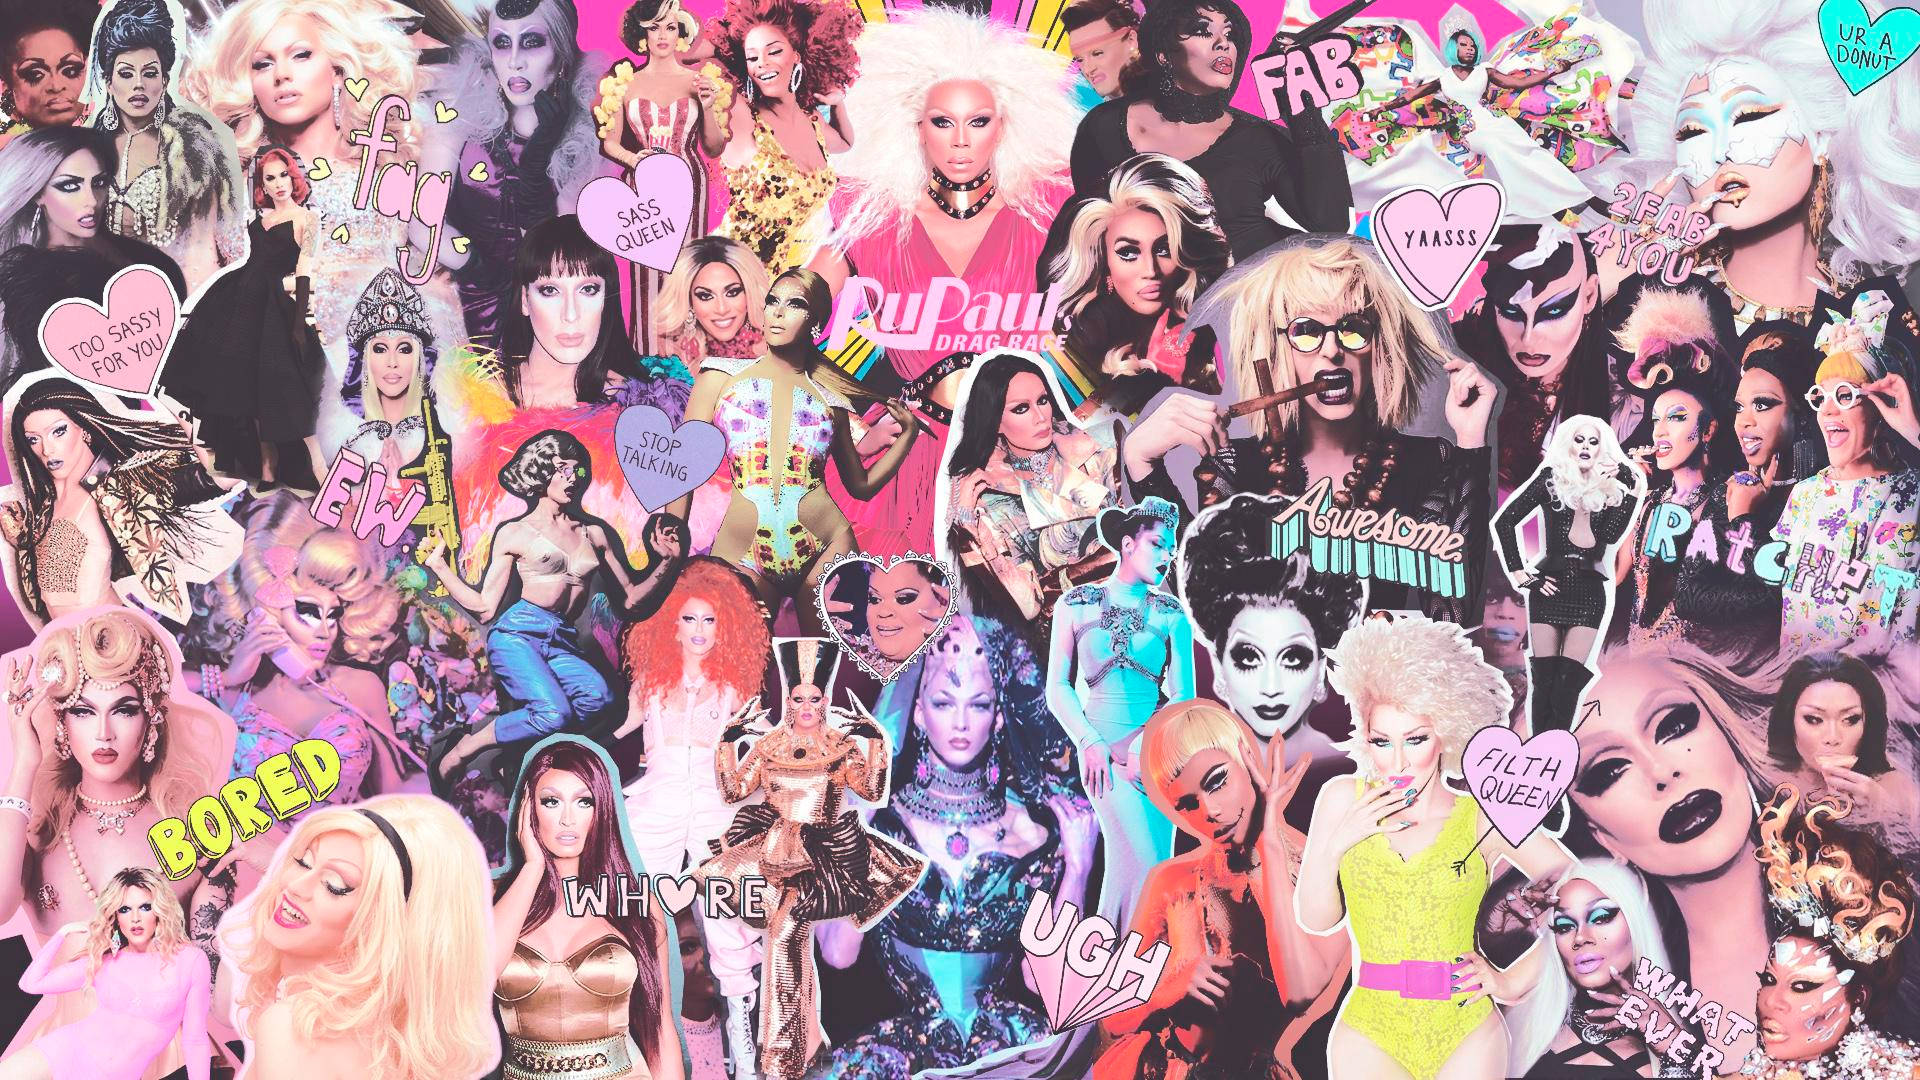 Rupaul's Drag Race Collage Word Art Background